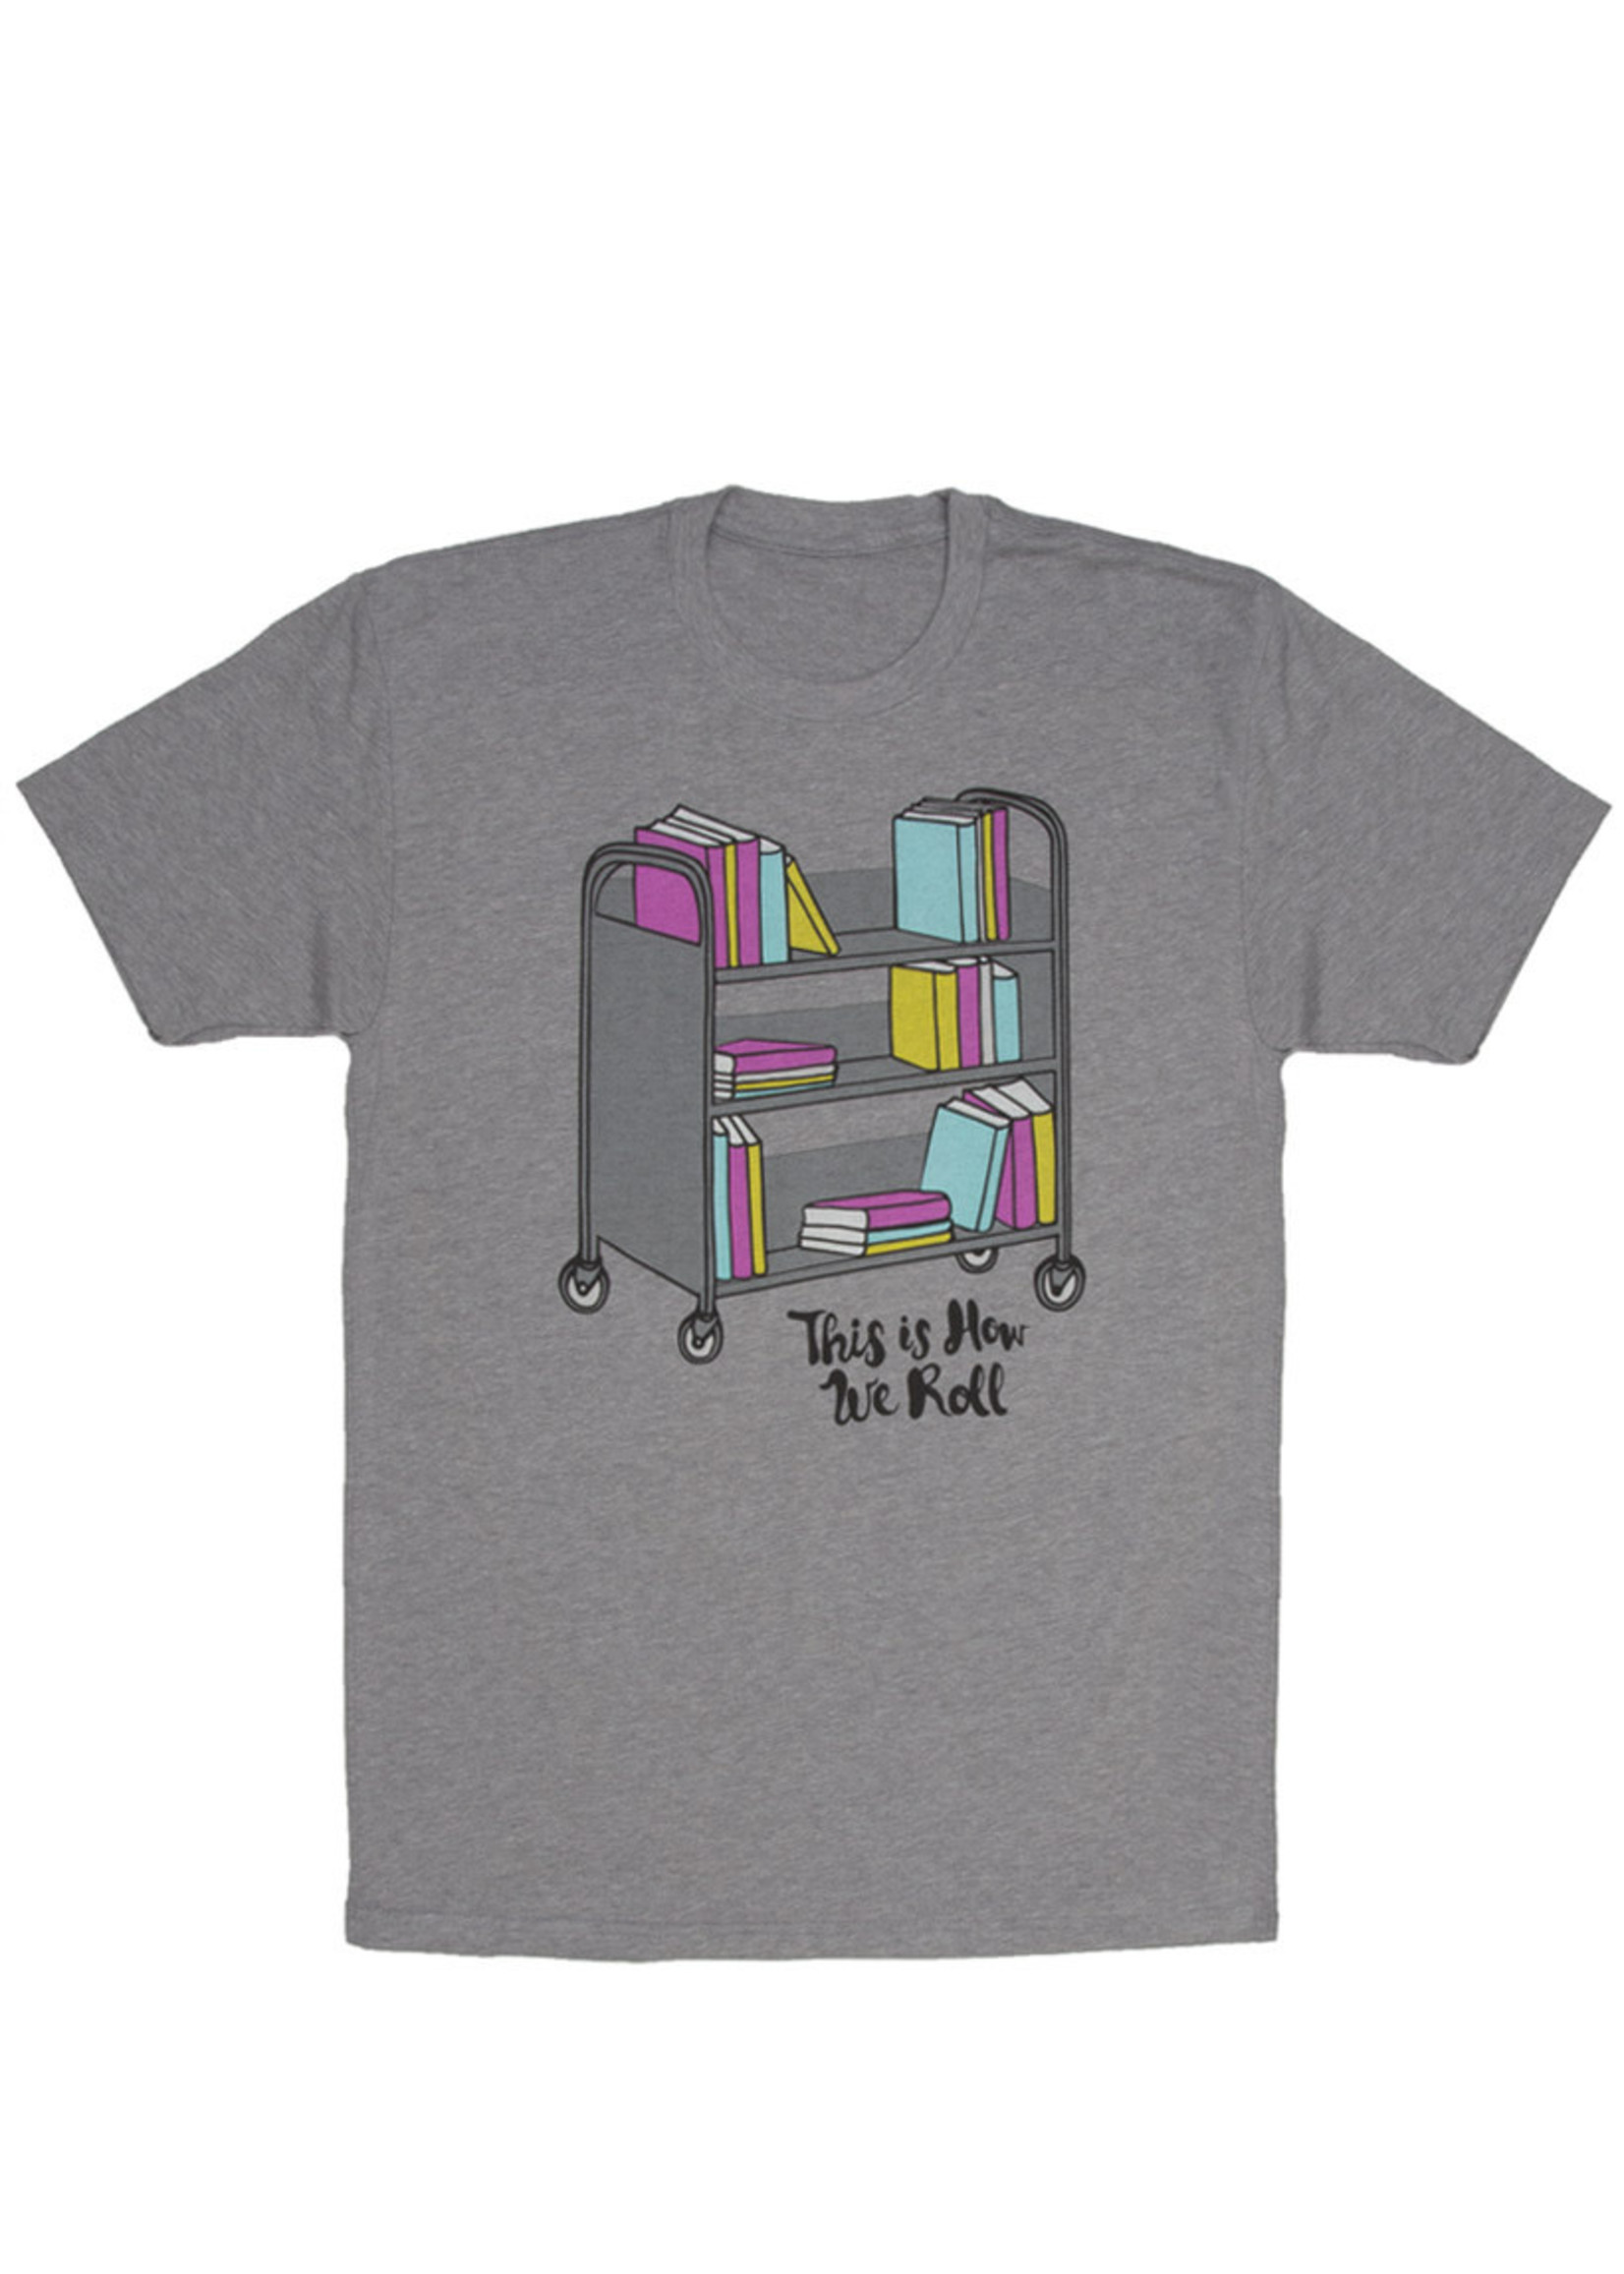 Out of Print This is How We Roll T-Shirt - Adult Unisex